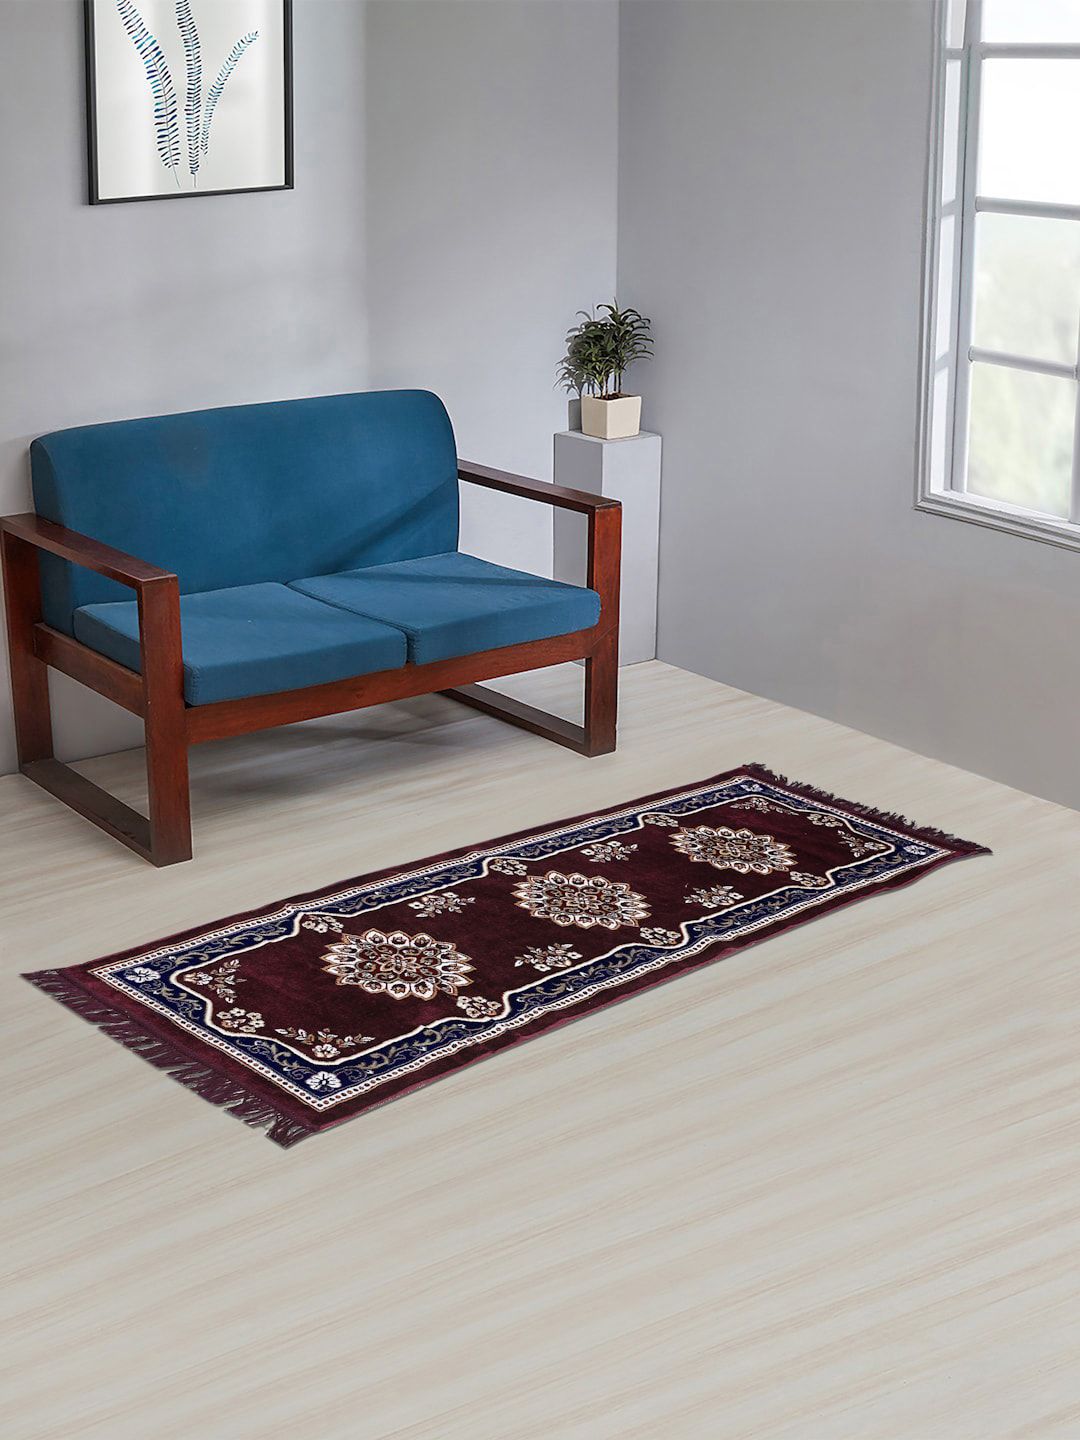 KLOTTHE Maroon & Navy-Blue Floral Printed Handmade Cotton Traditional Carpet Price in India